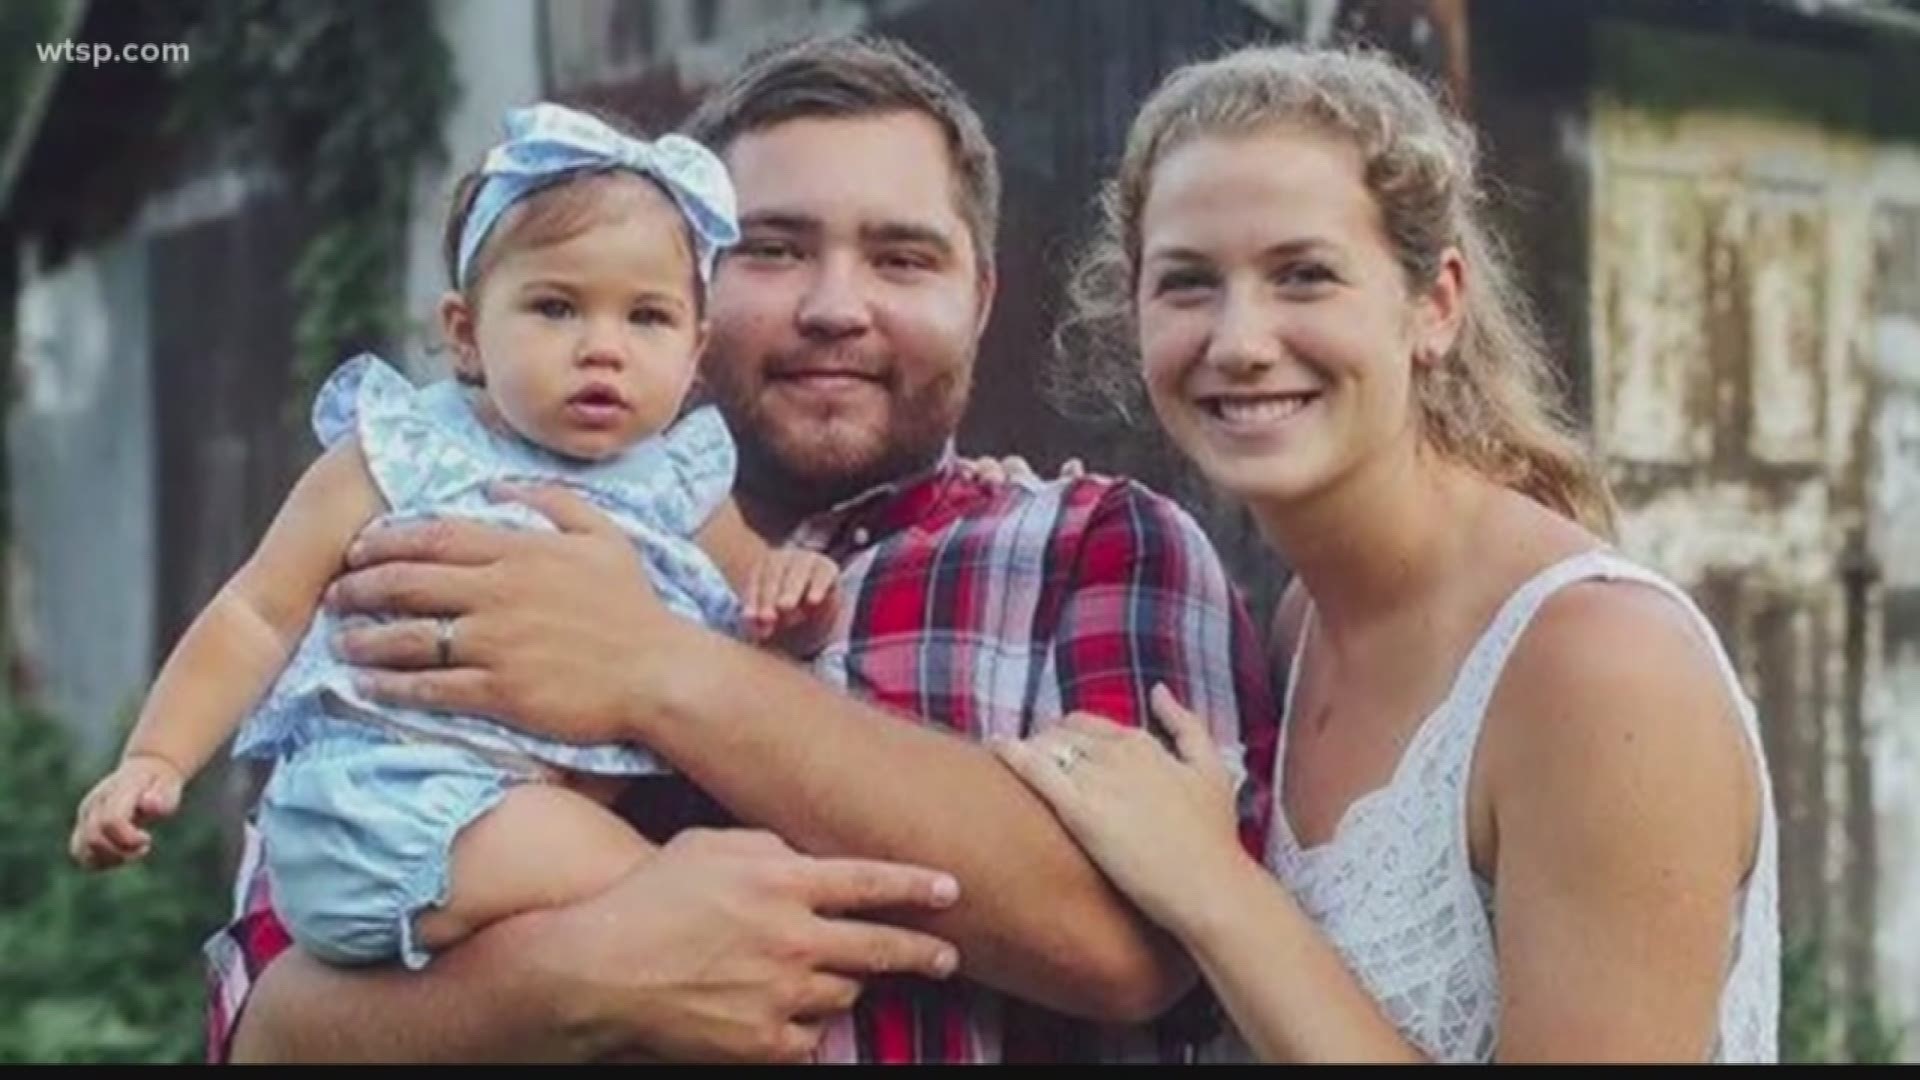 Jessica Raubenolt, 24, and her 21-month-old daughter Lillia were killed during a street race crash on May 23, 2018.